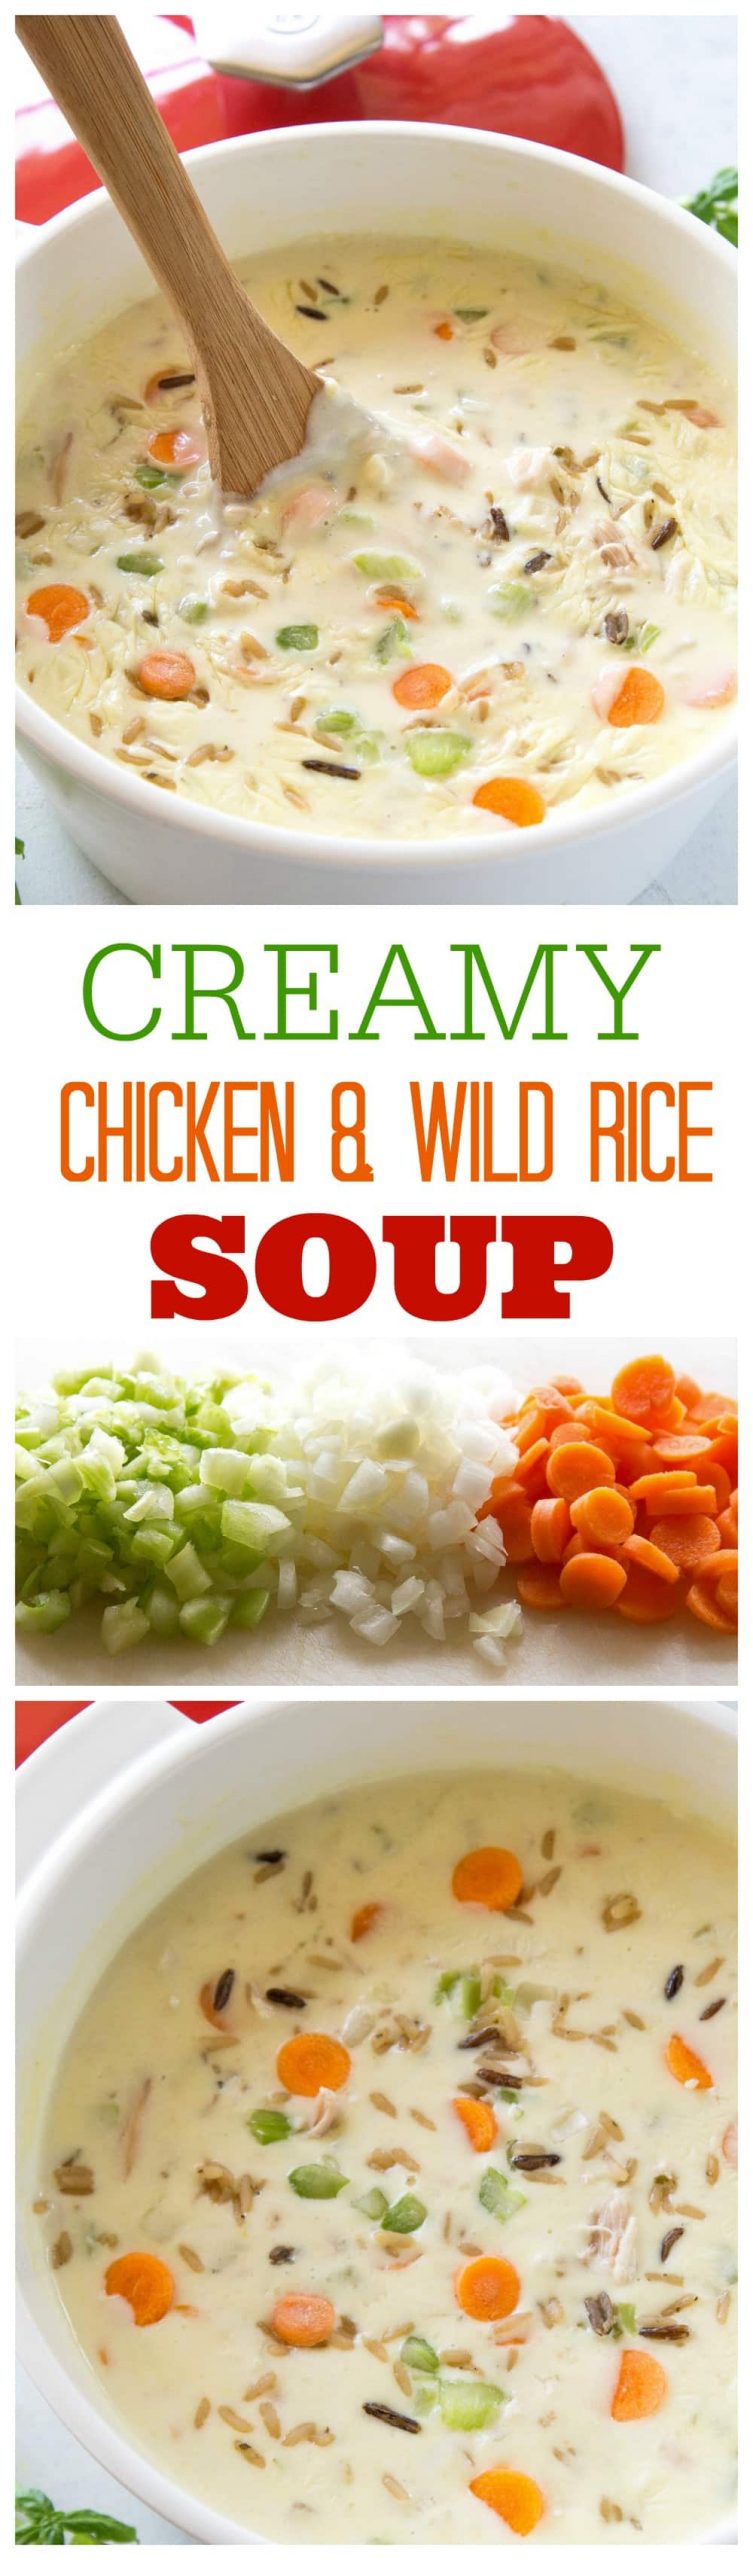 Creamy Chicken and Wild Rice Soup - nothing beats warm soup on a cold day. #creamy #chicken #wild #rice #soup #recipe #easy #dinner